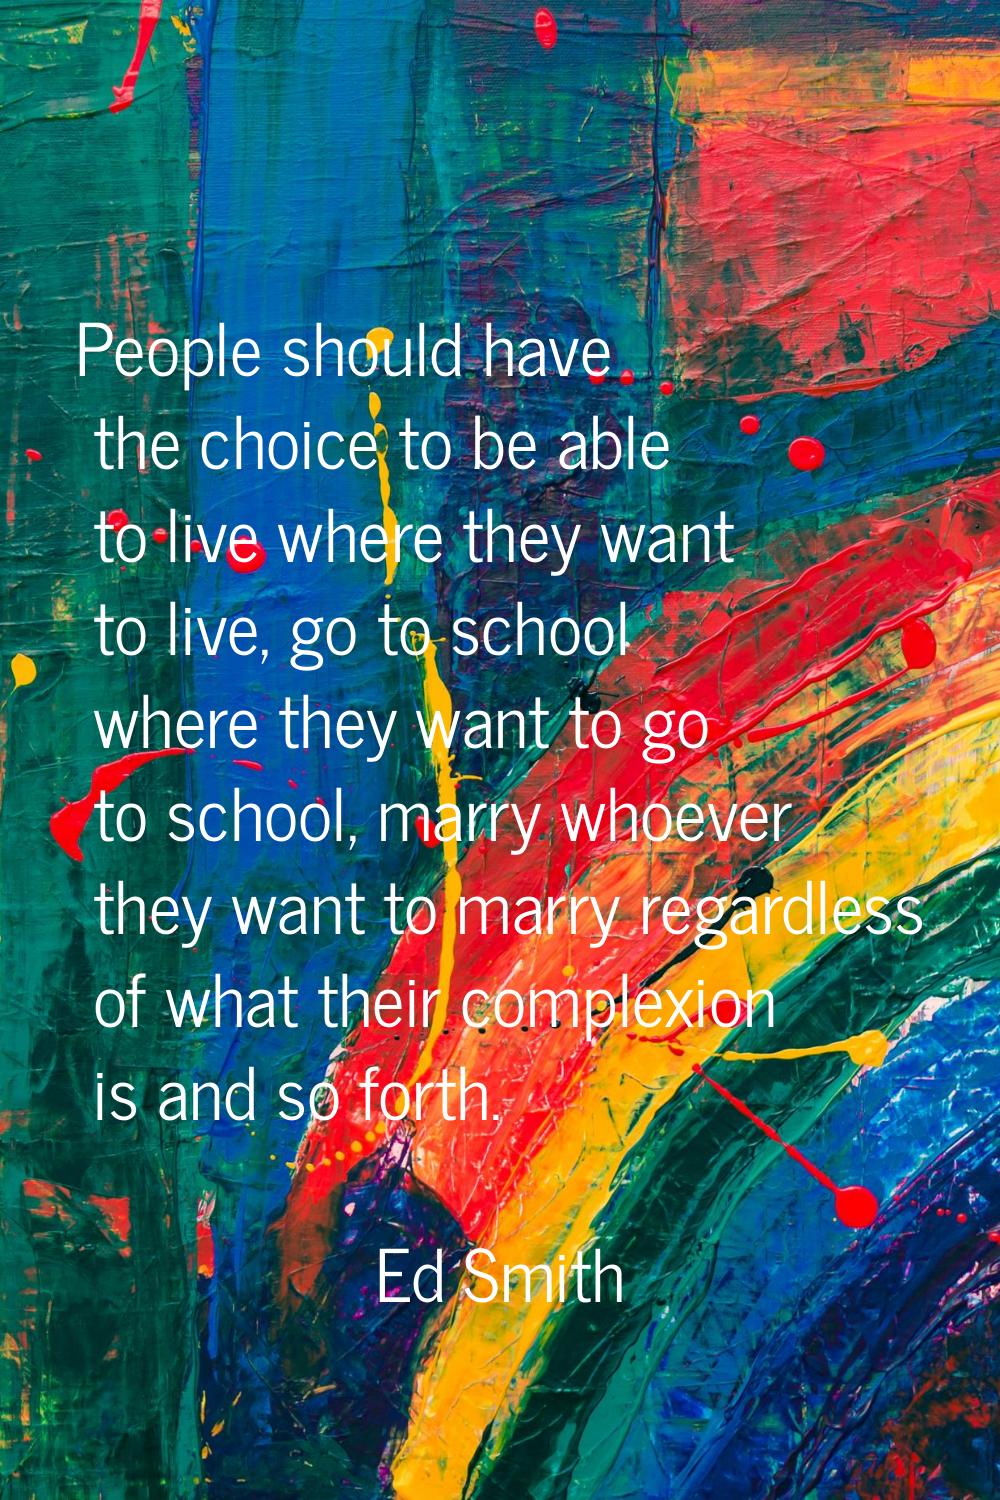 People should have the choice to be able to live where they want to live, go to school where they w